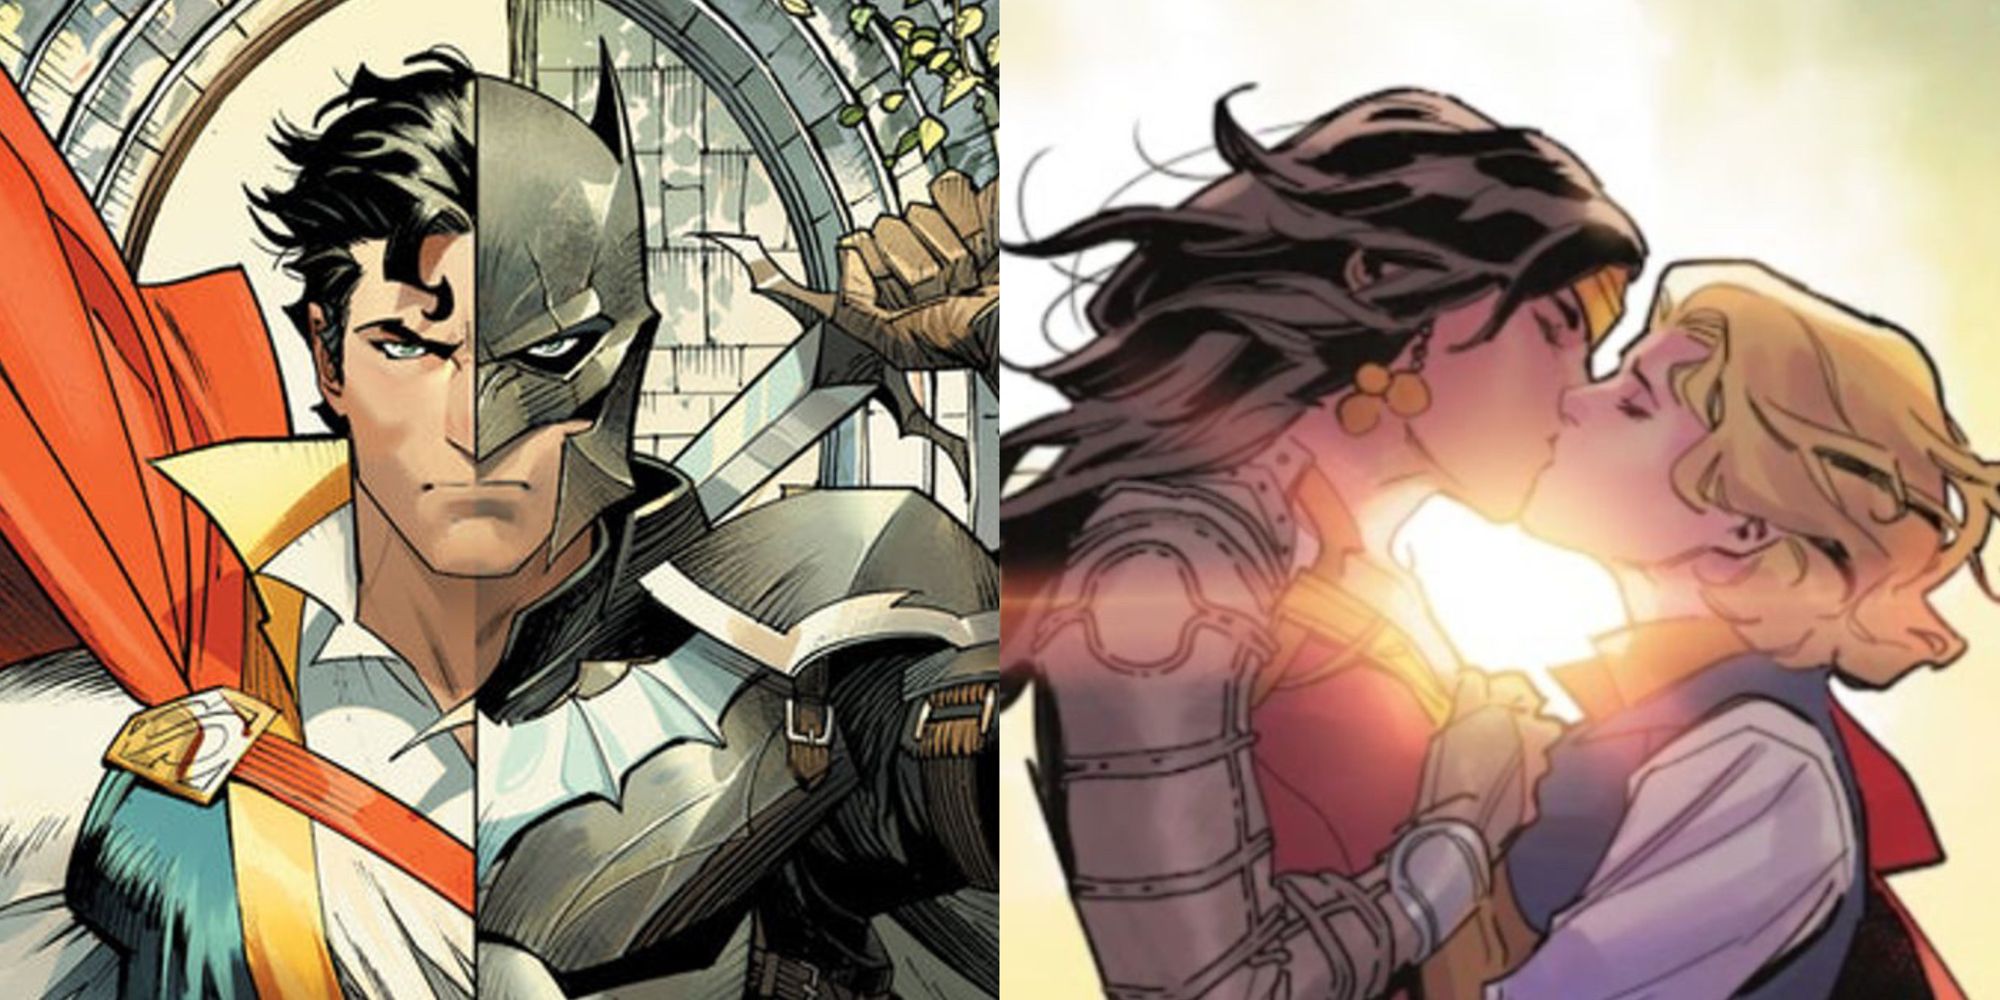 A split image featuring comic art of Kal-El and Bat-Prince, and of Diana kissing Zala in Dark Knights of Steel